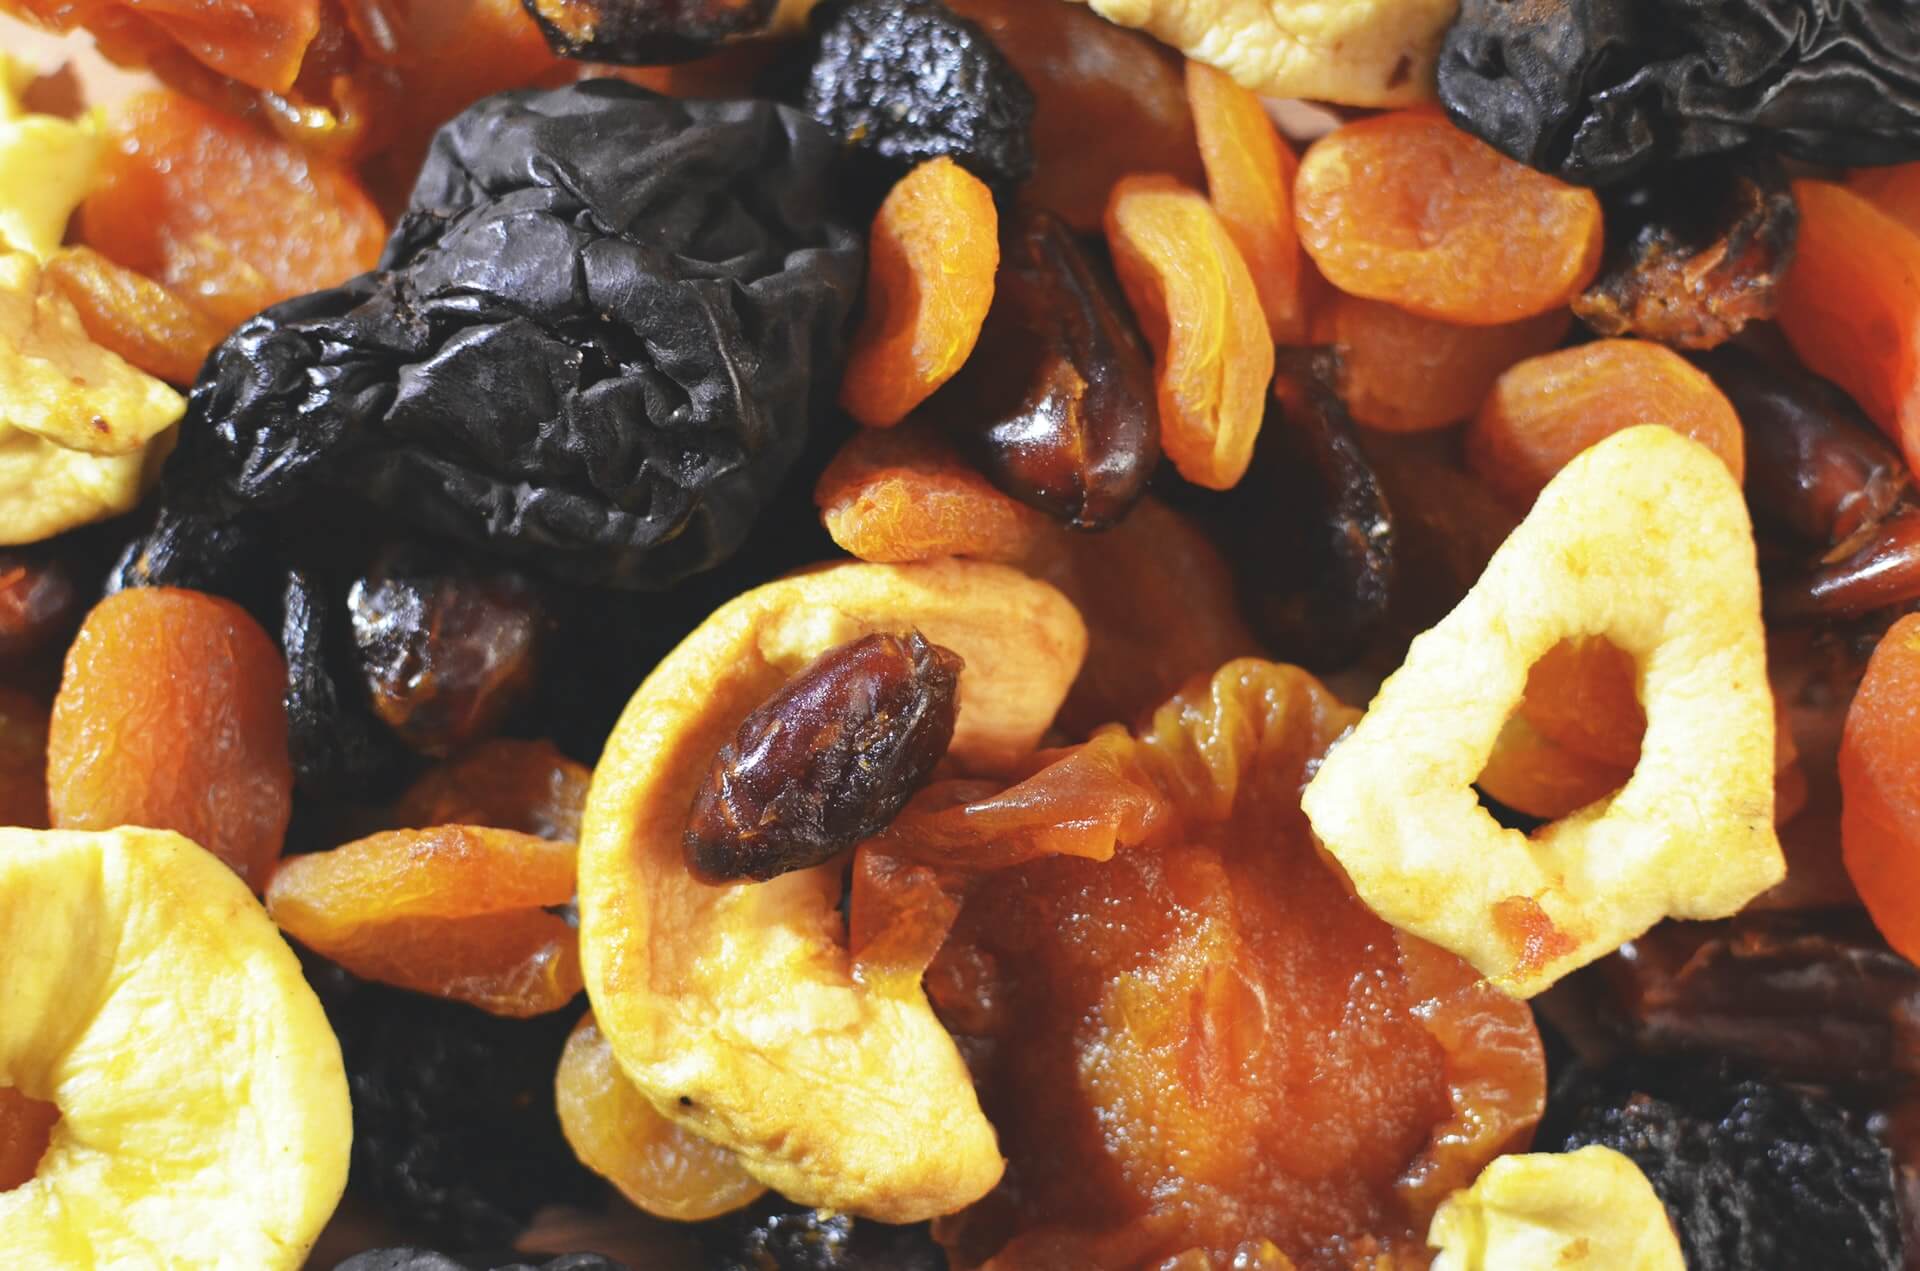 A Dietitian’s Take: Is dried fruit just as nutritious?